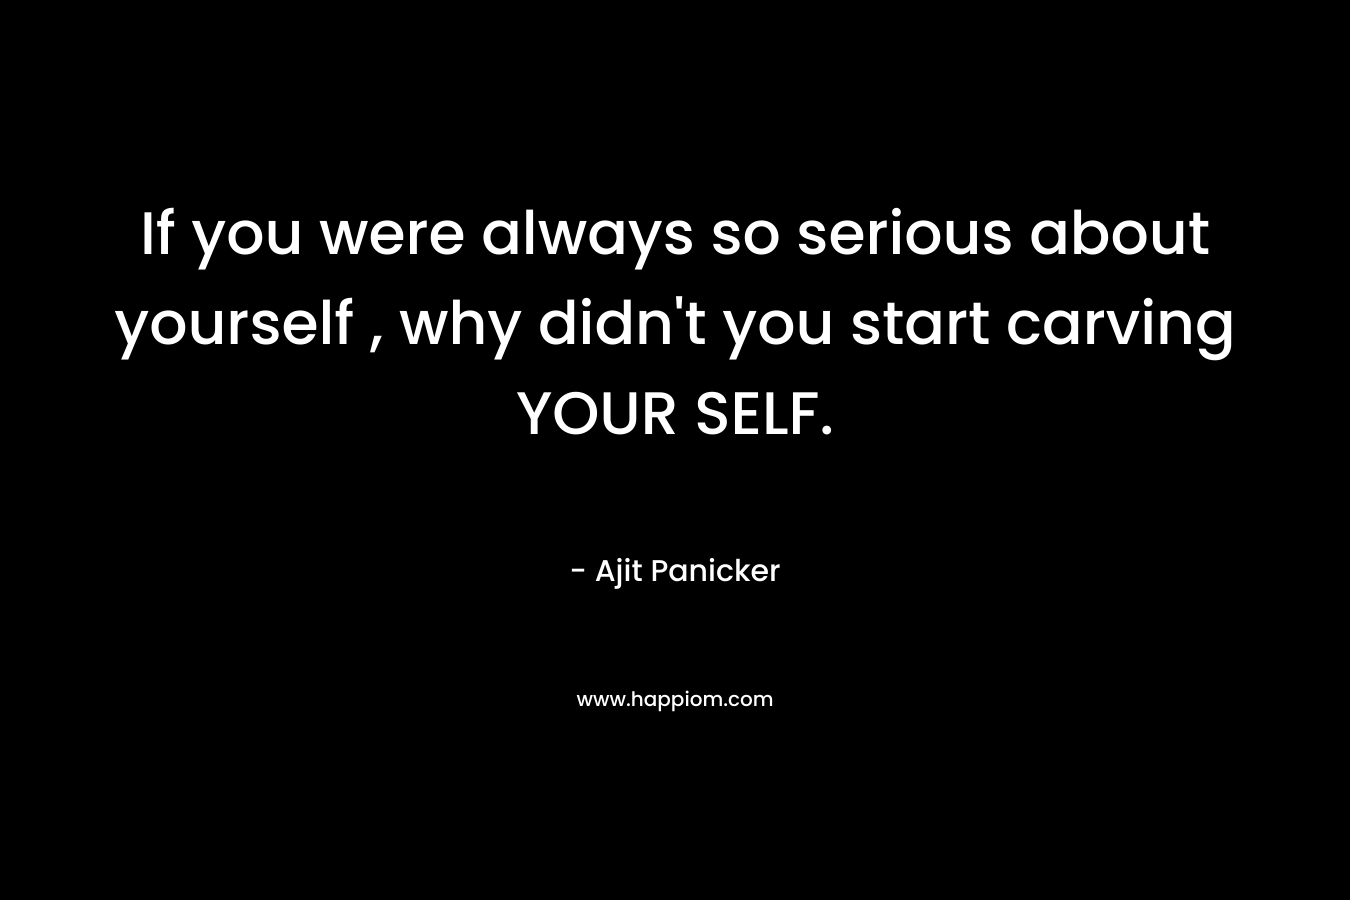 If you were always so serious about yourself , why didn't you start carving YOUR SELF.